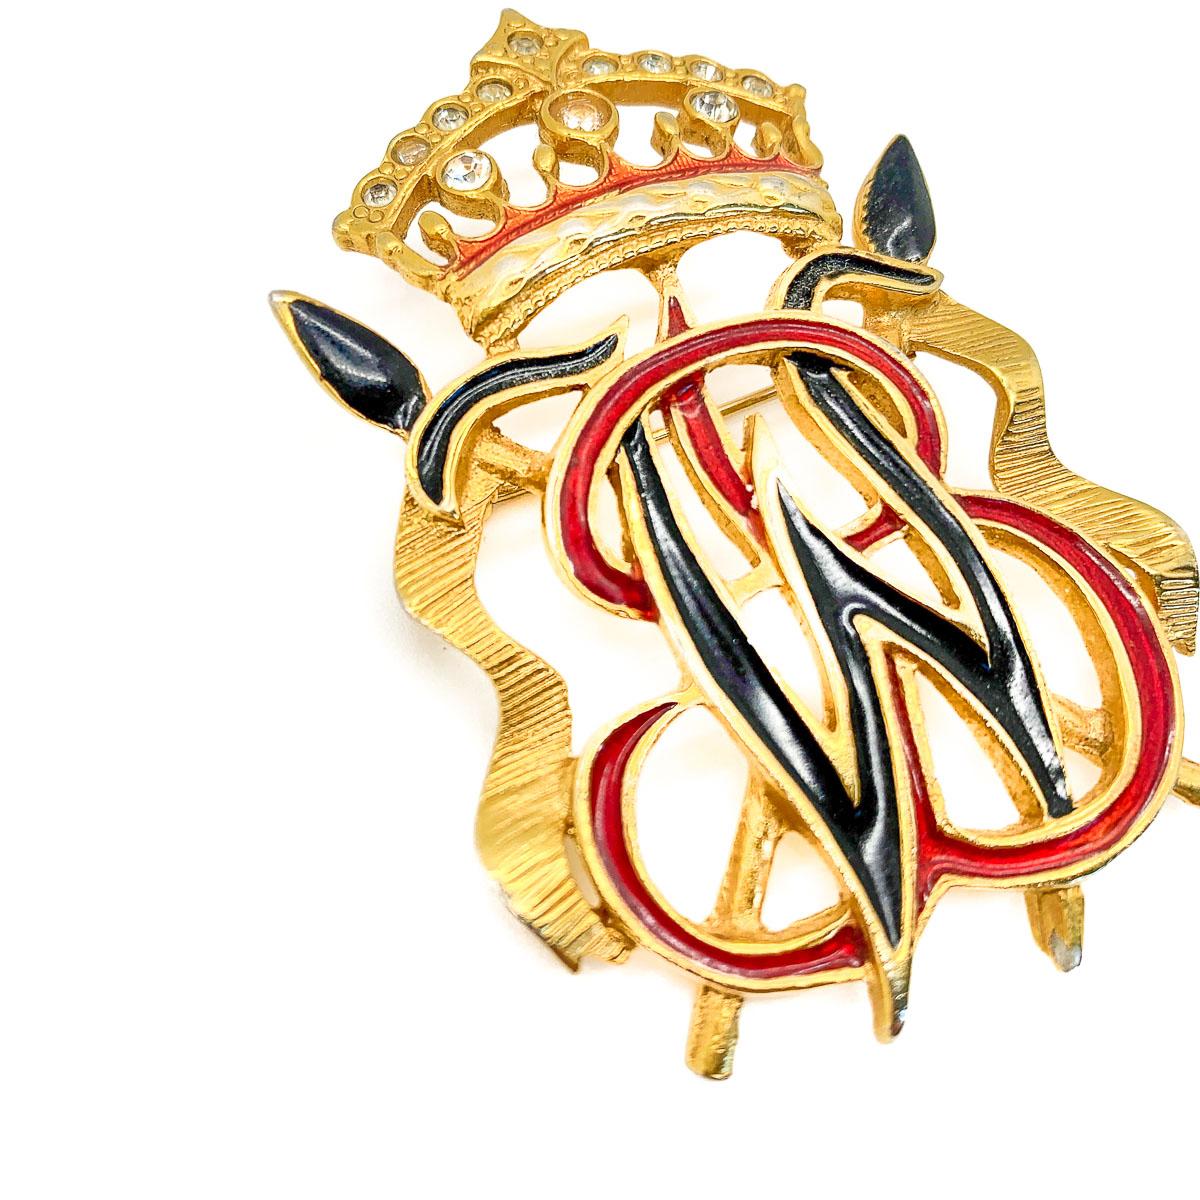 A Vintage Butler & Wilson Heraldic Brooch from the 1980s. Crafted in gold plated metal and adorned with enamel and rhinestones adoring the intertwined initials of this world famous jewellery company. In very good vintage condition. Signed. Approx.